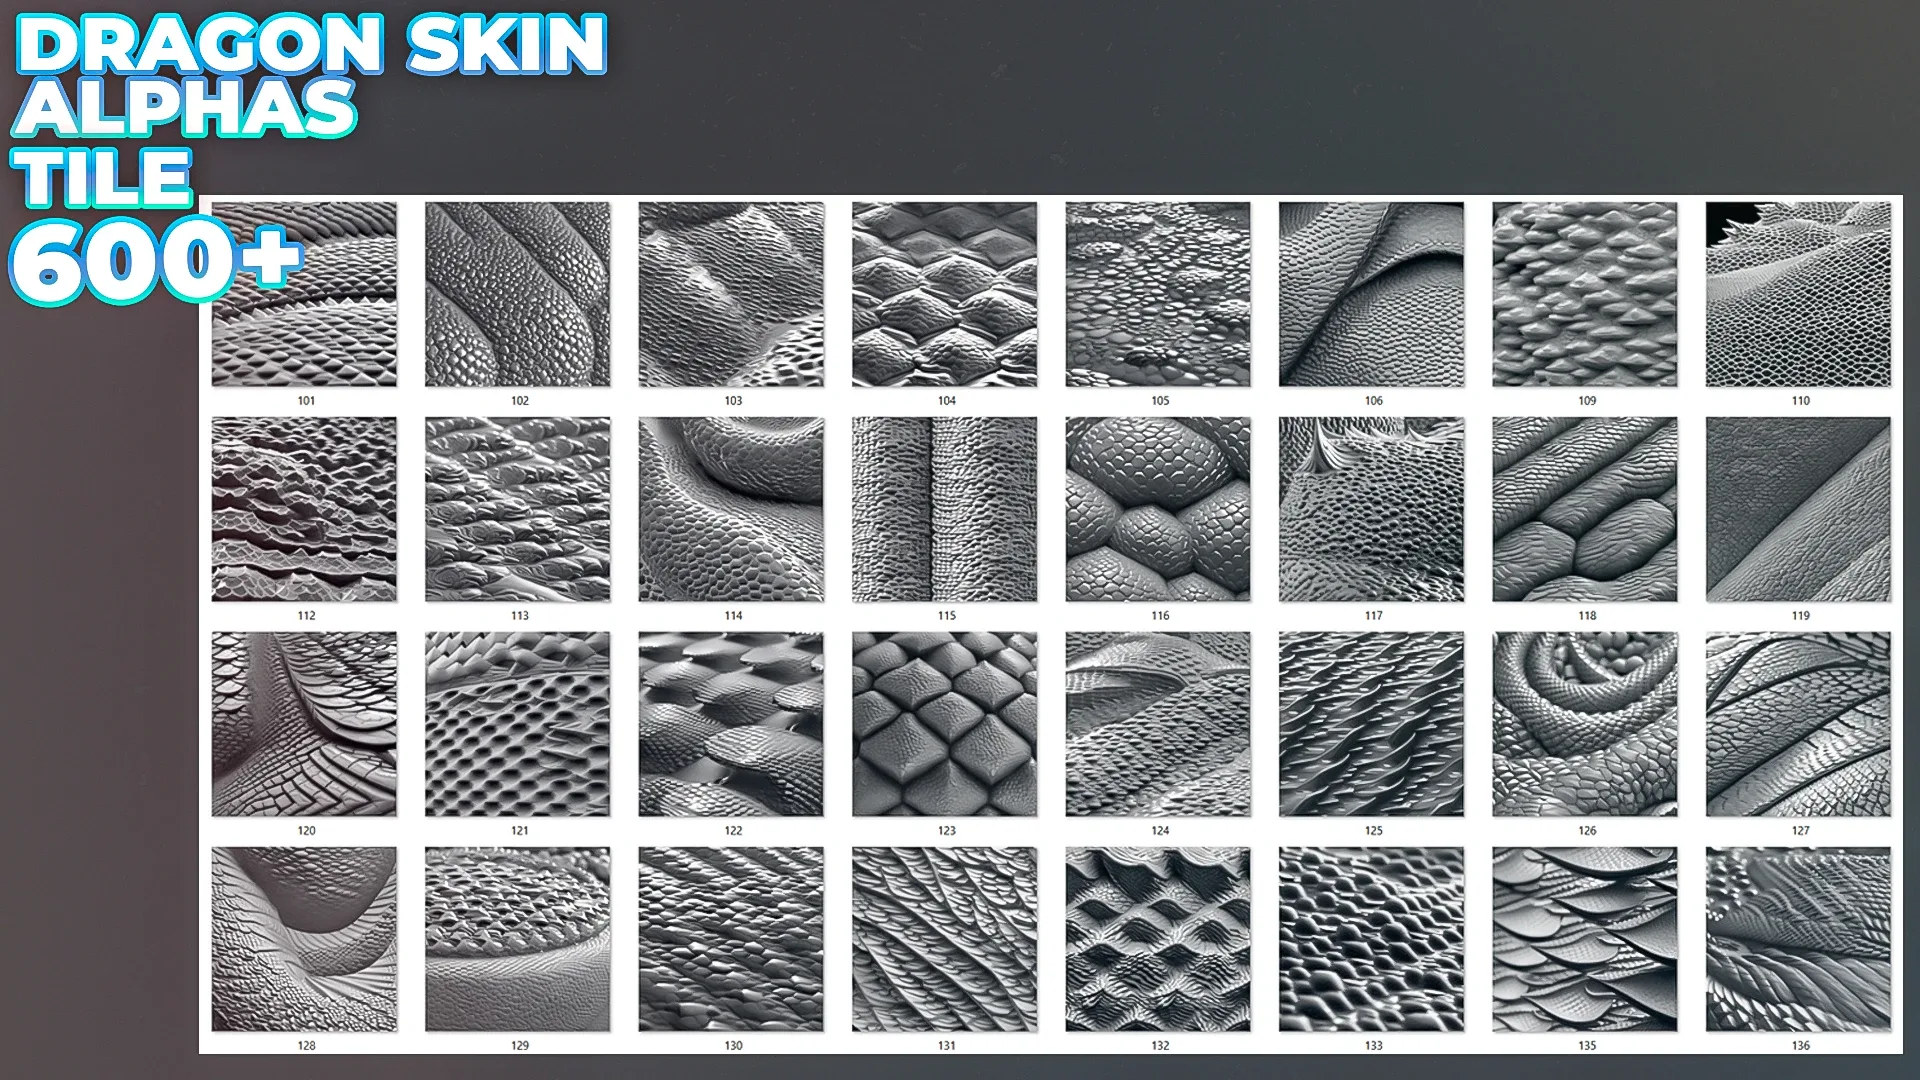 600+ Reptile, Dragon, Snake Skin Alphas for ZBrush (Displacement map) vol.3